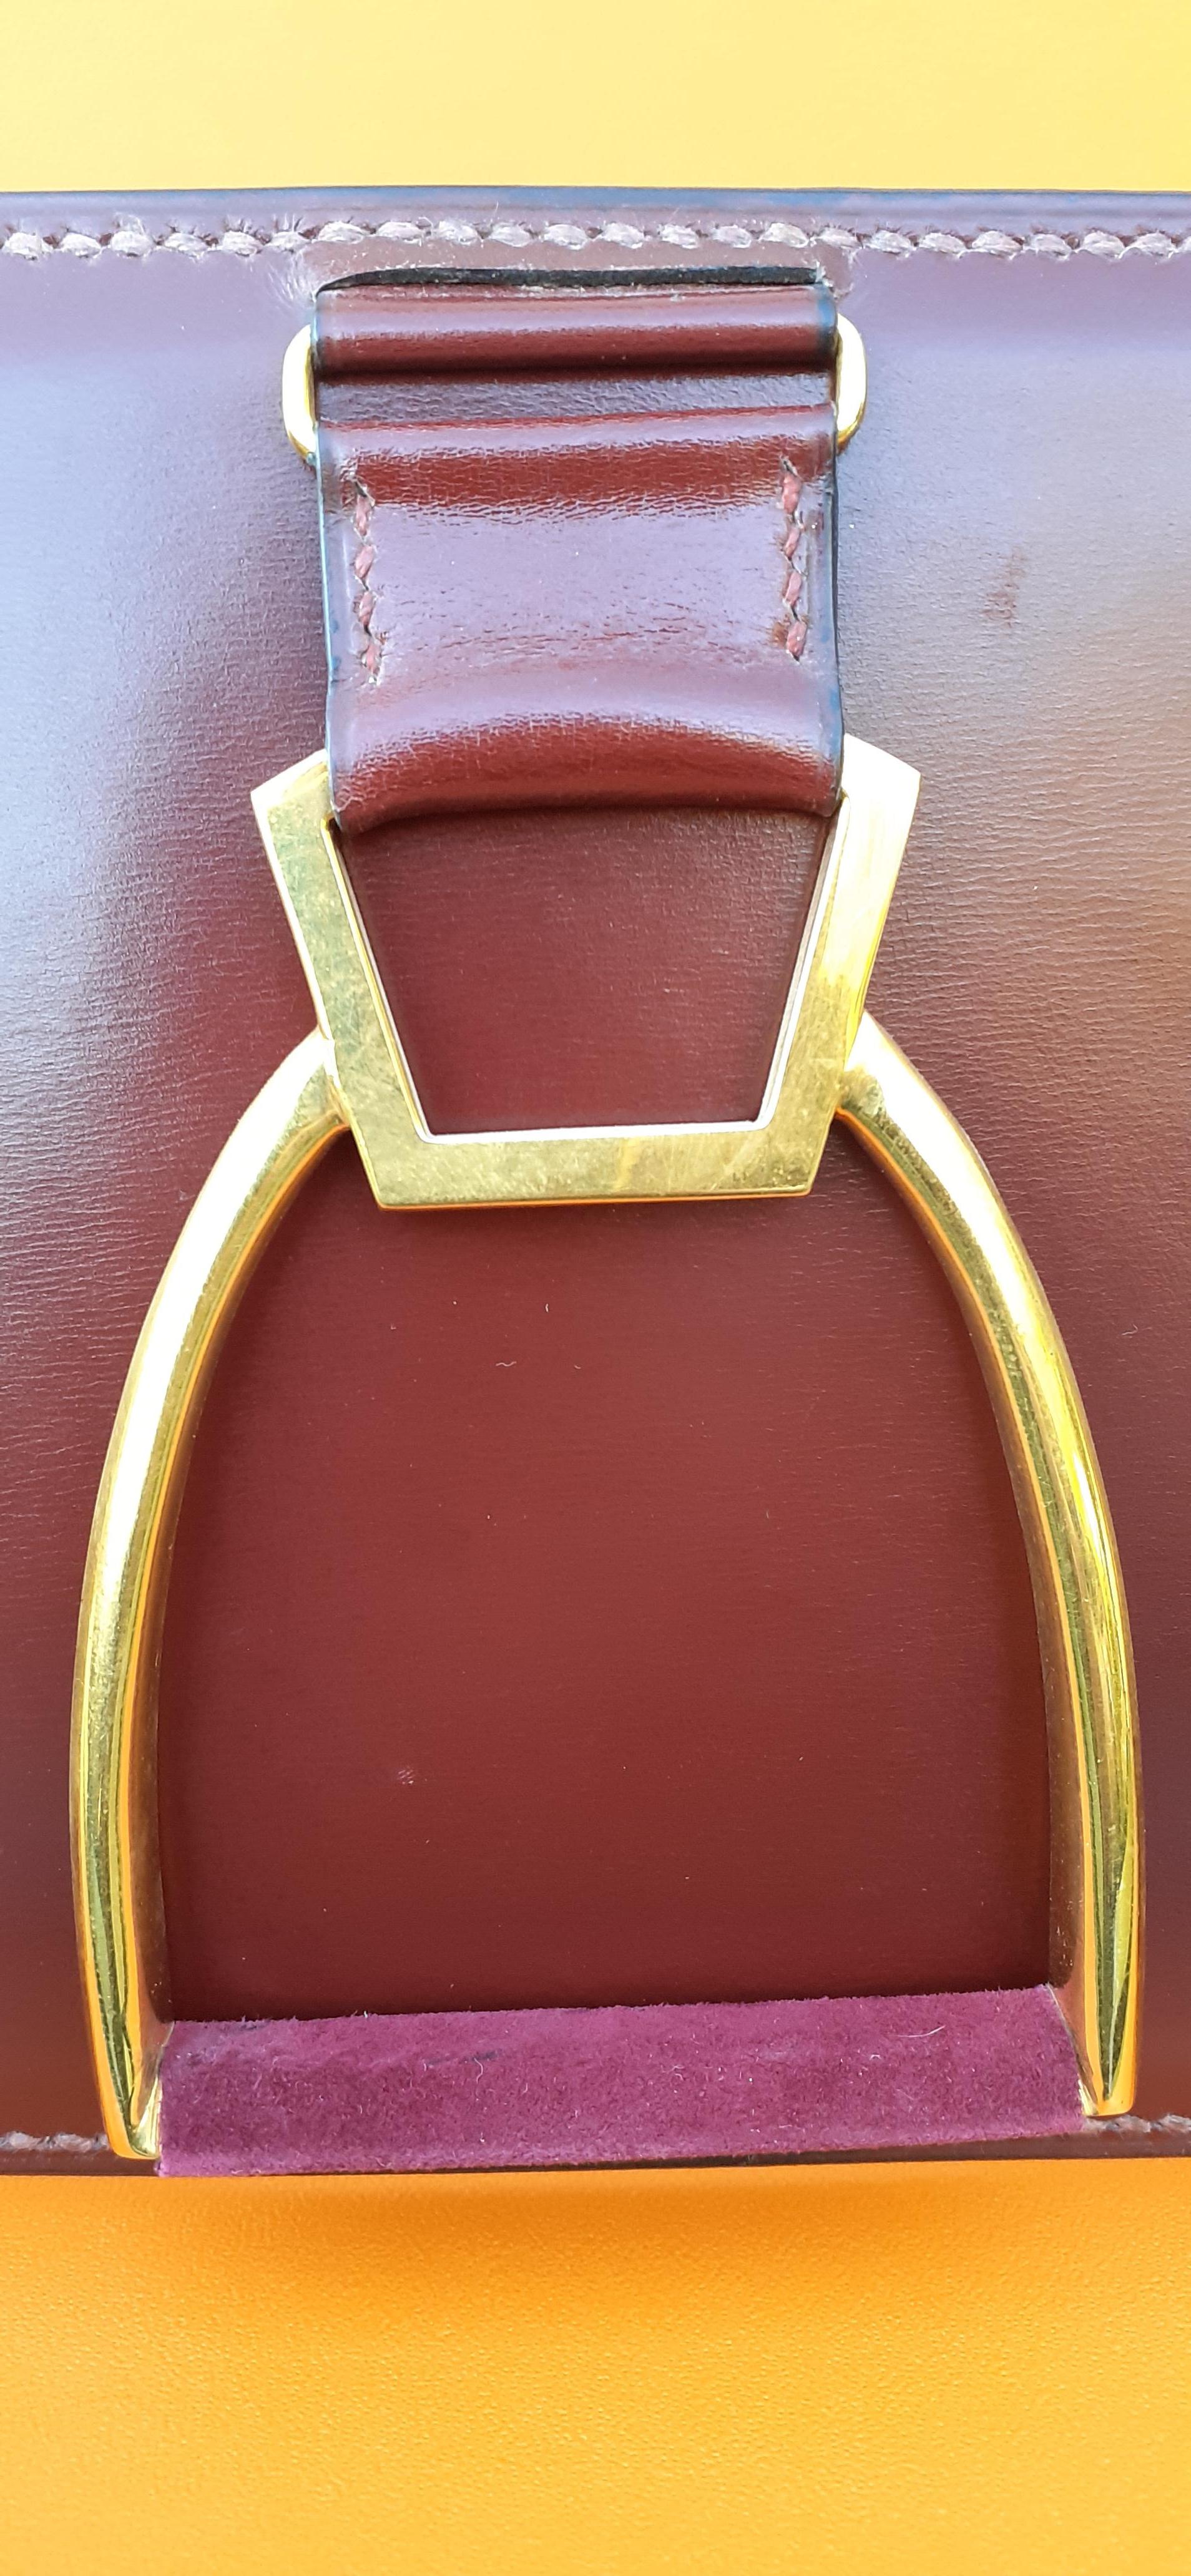 Exceptional Hermès Tie Hanger Tie Rack 3 Stirrups in Metal and Leather For Sale 2